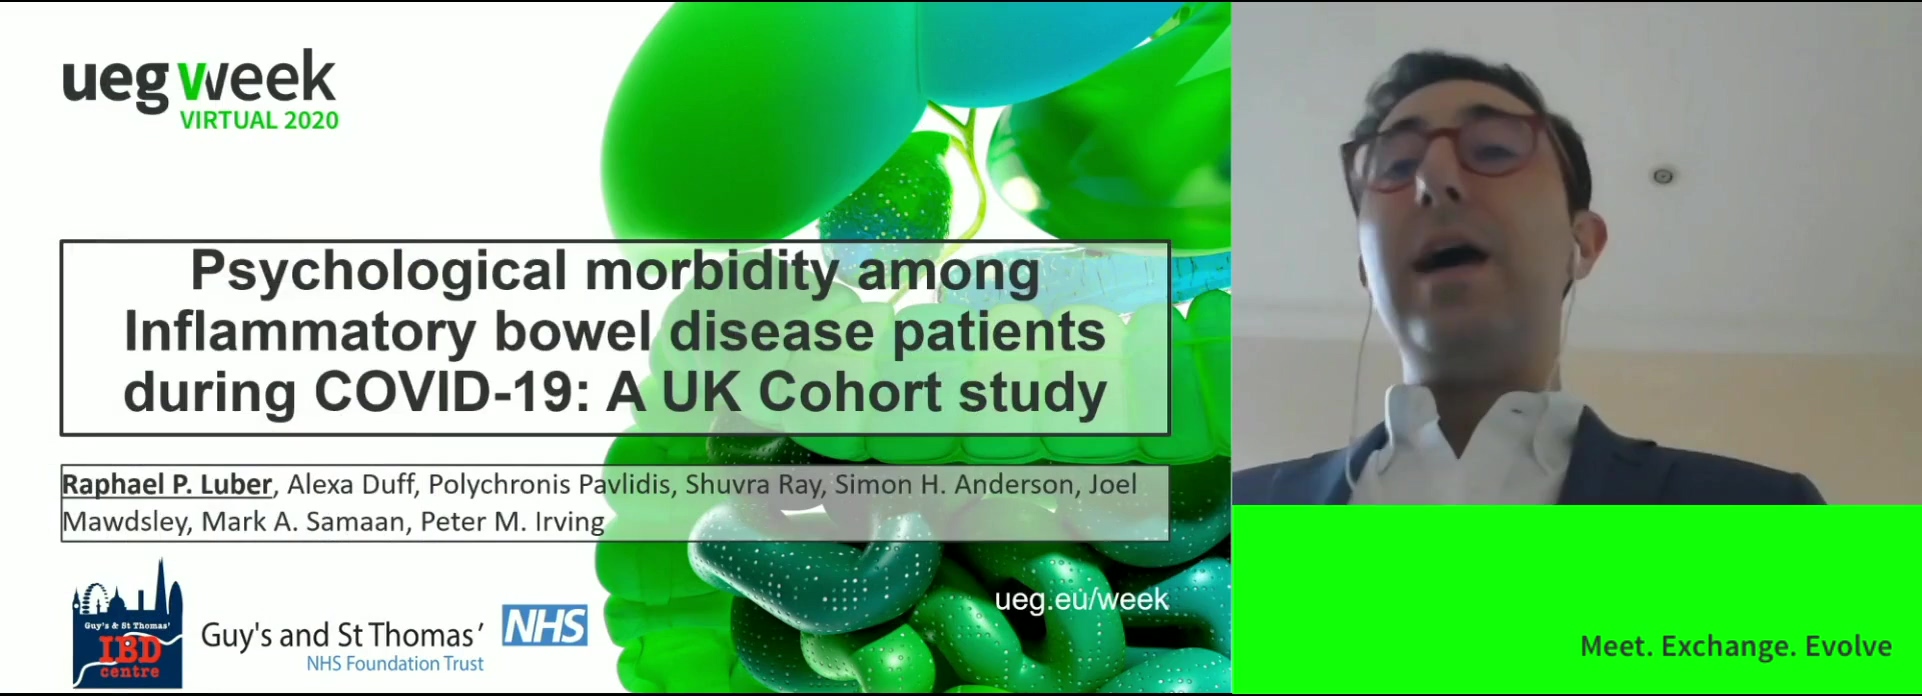 PSYCHOLOGICAL MORBIDITY AMONG INFLAMMATORY BOWEL DISEASE PATIENTS DURING COVID-19: A UK COHORT STUDY